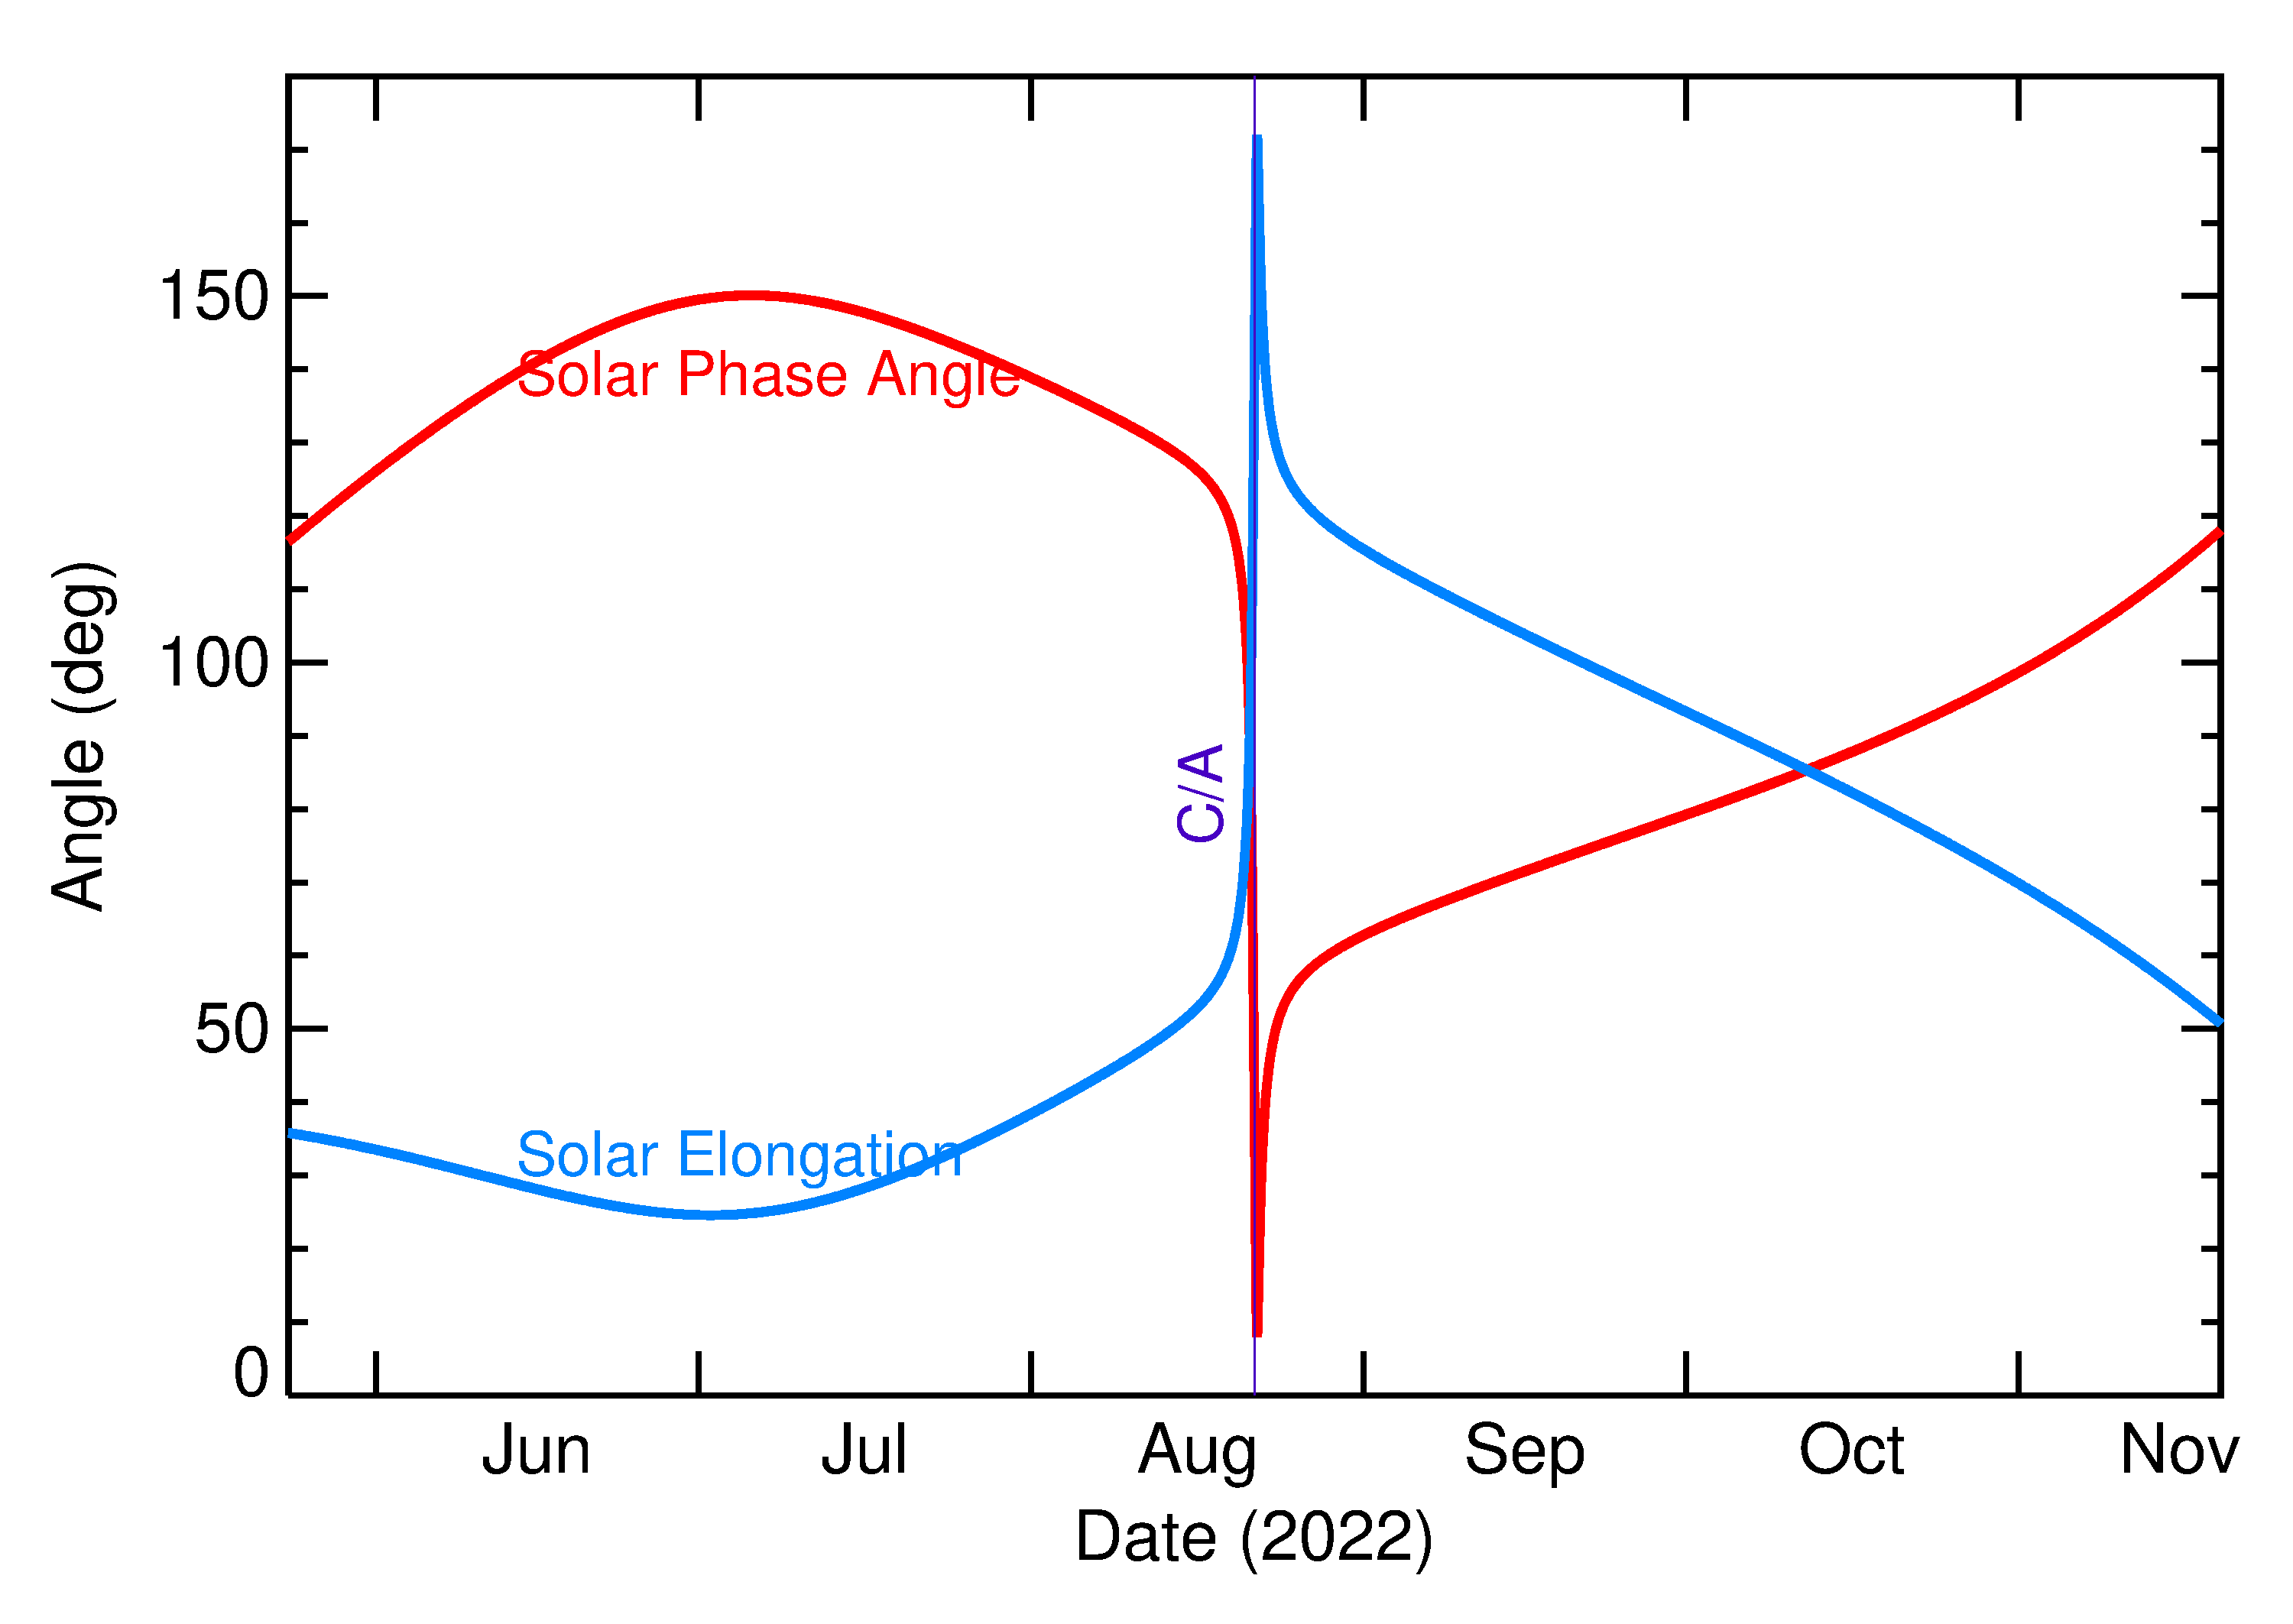 Solar Elongation and Solar Phase Angle of 2022 QE1 in the months around closest approach